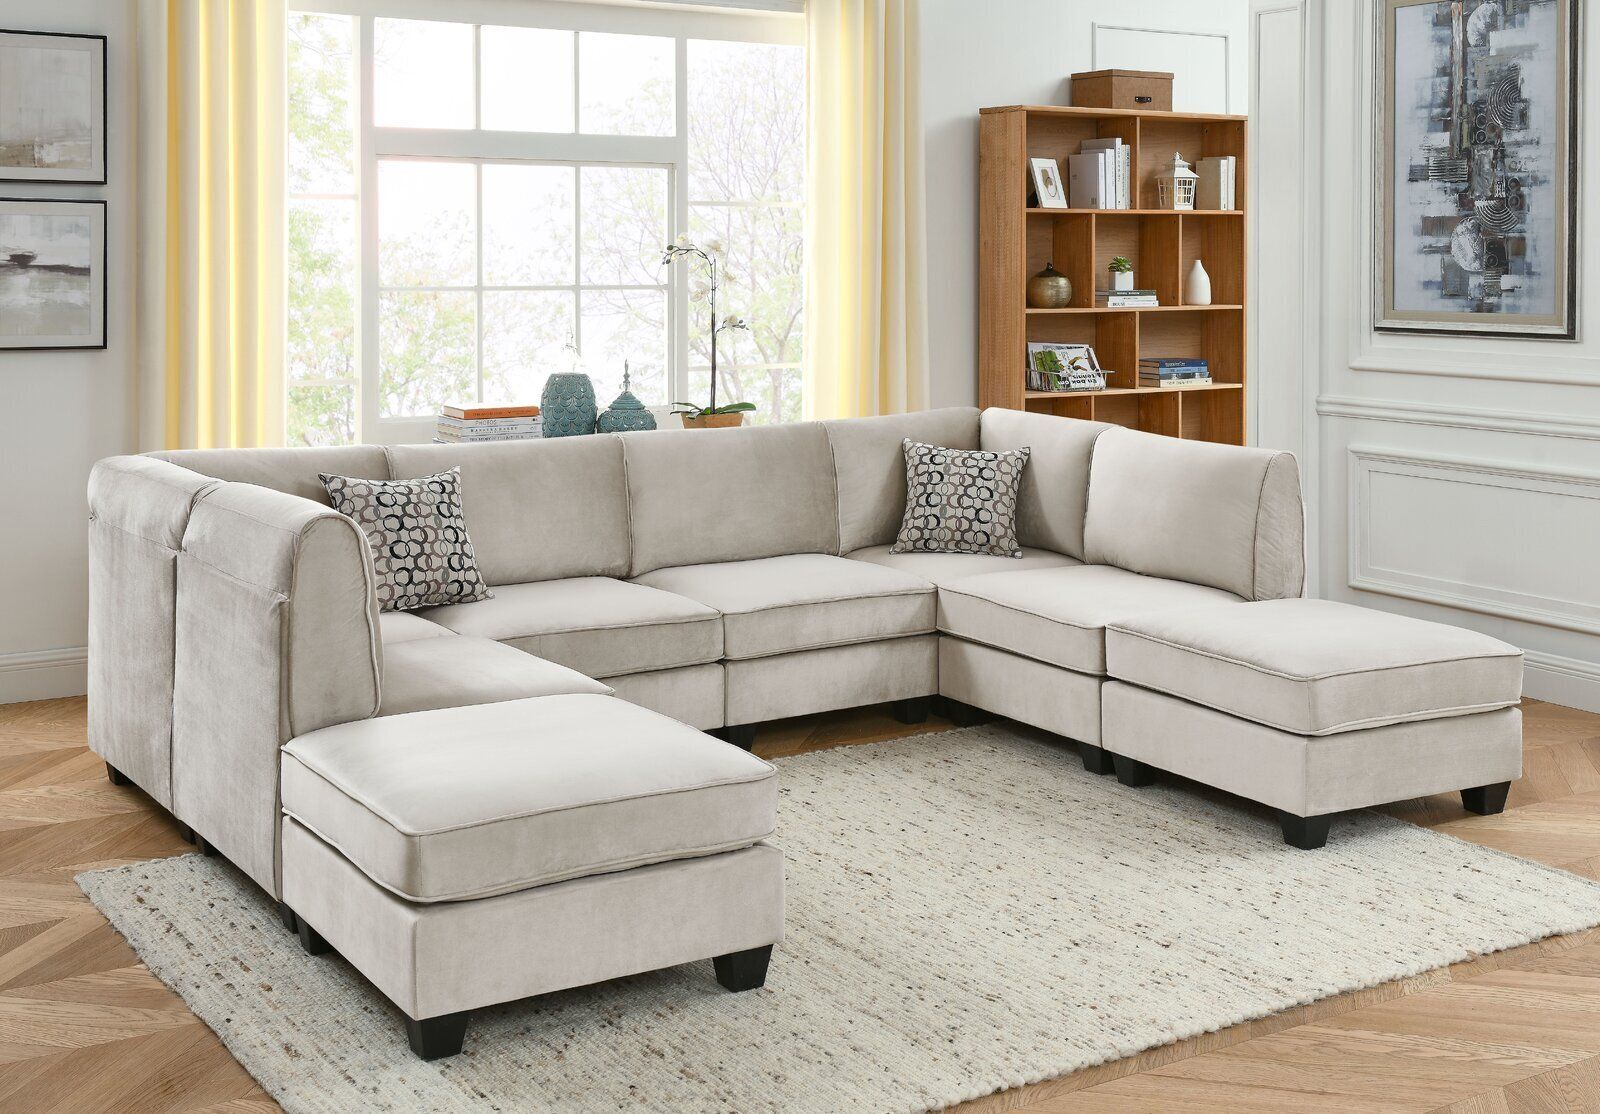 Sectional Sofa With Ottoman – Foter Intended For Sofas With Ottomans (View 14 of 15)